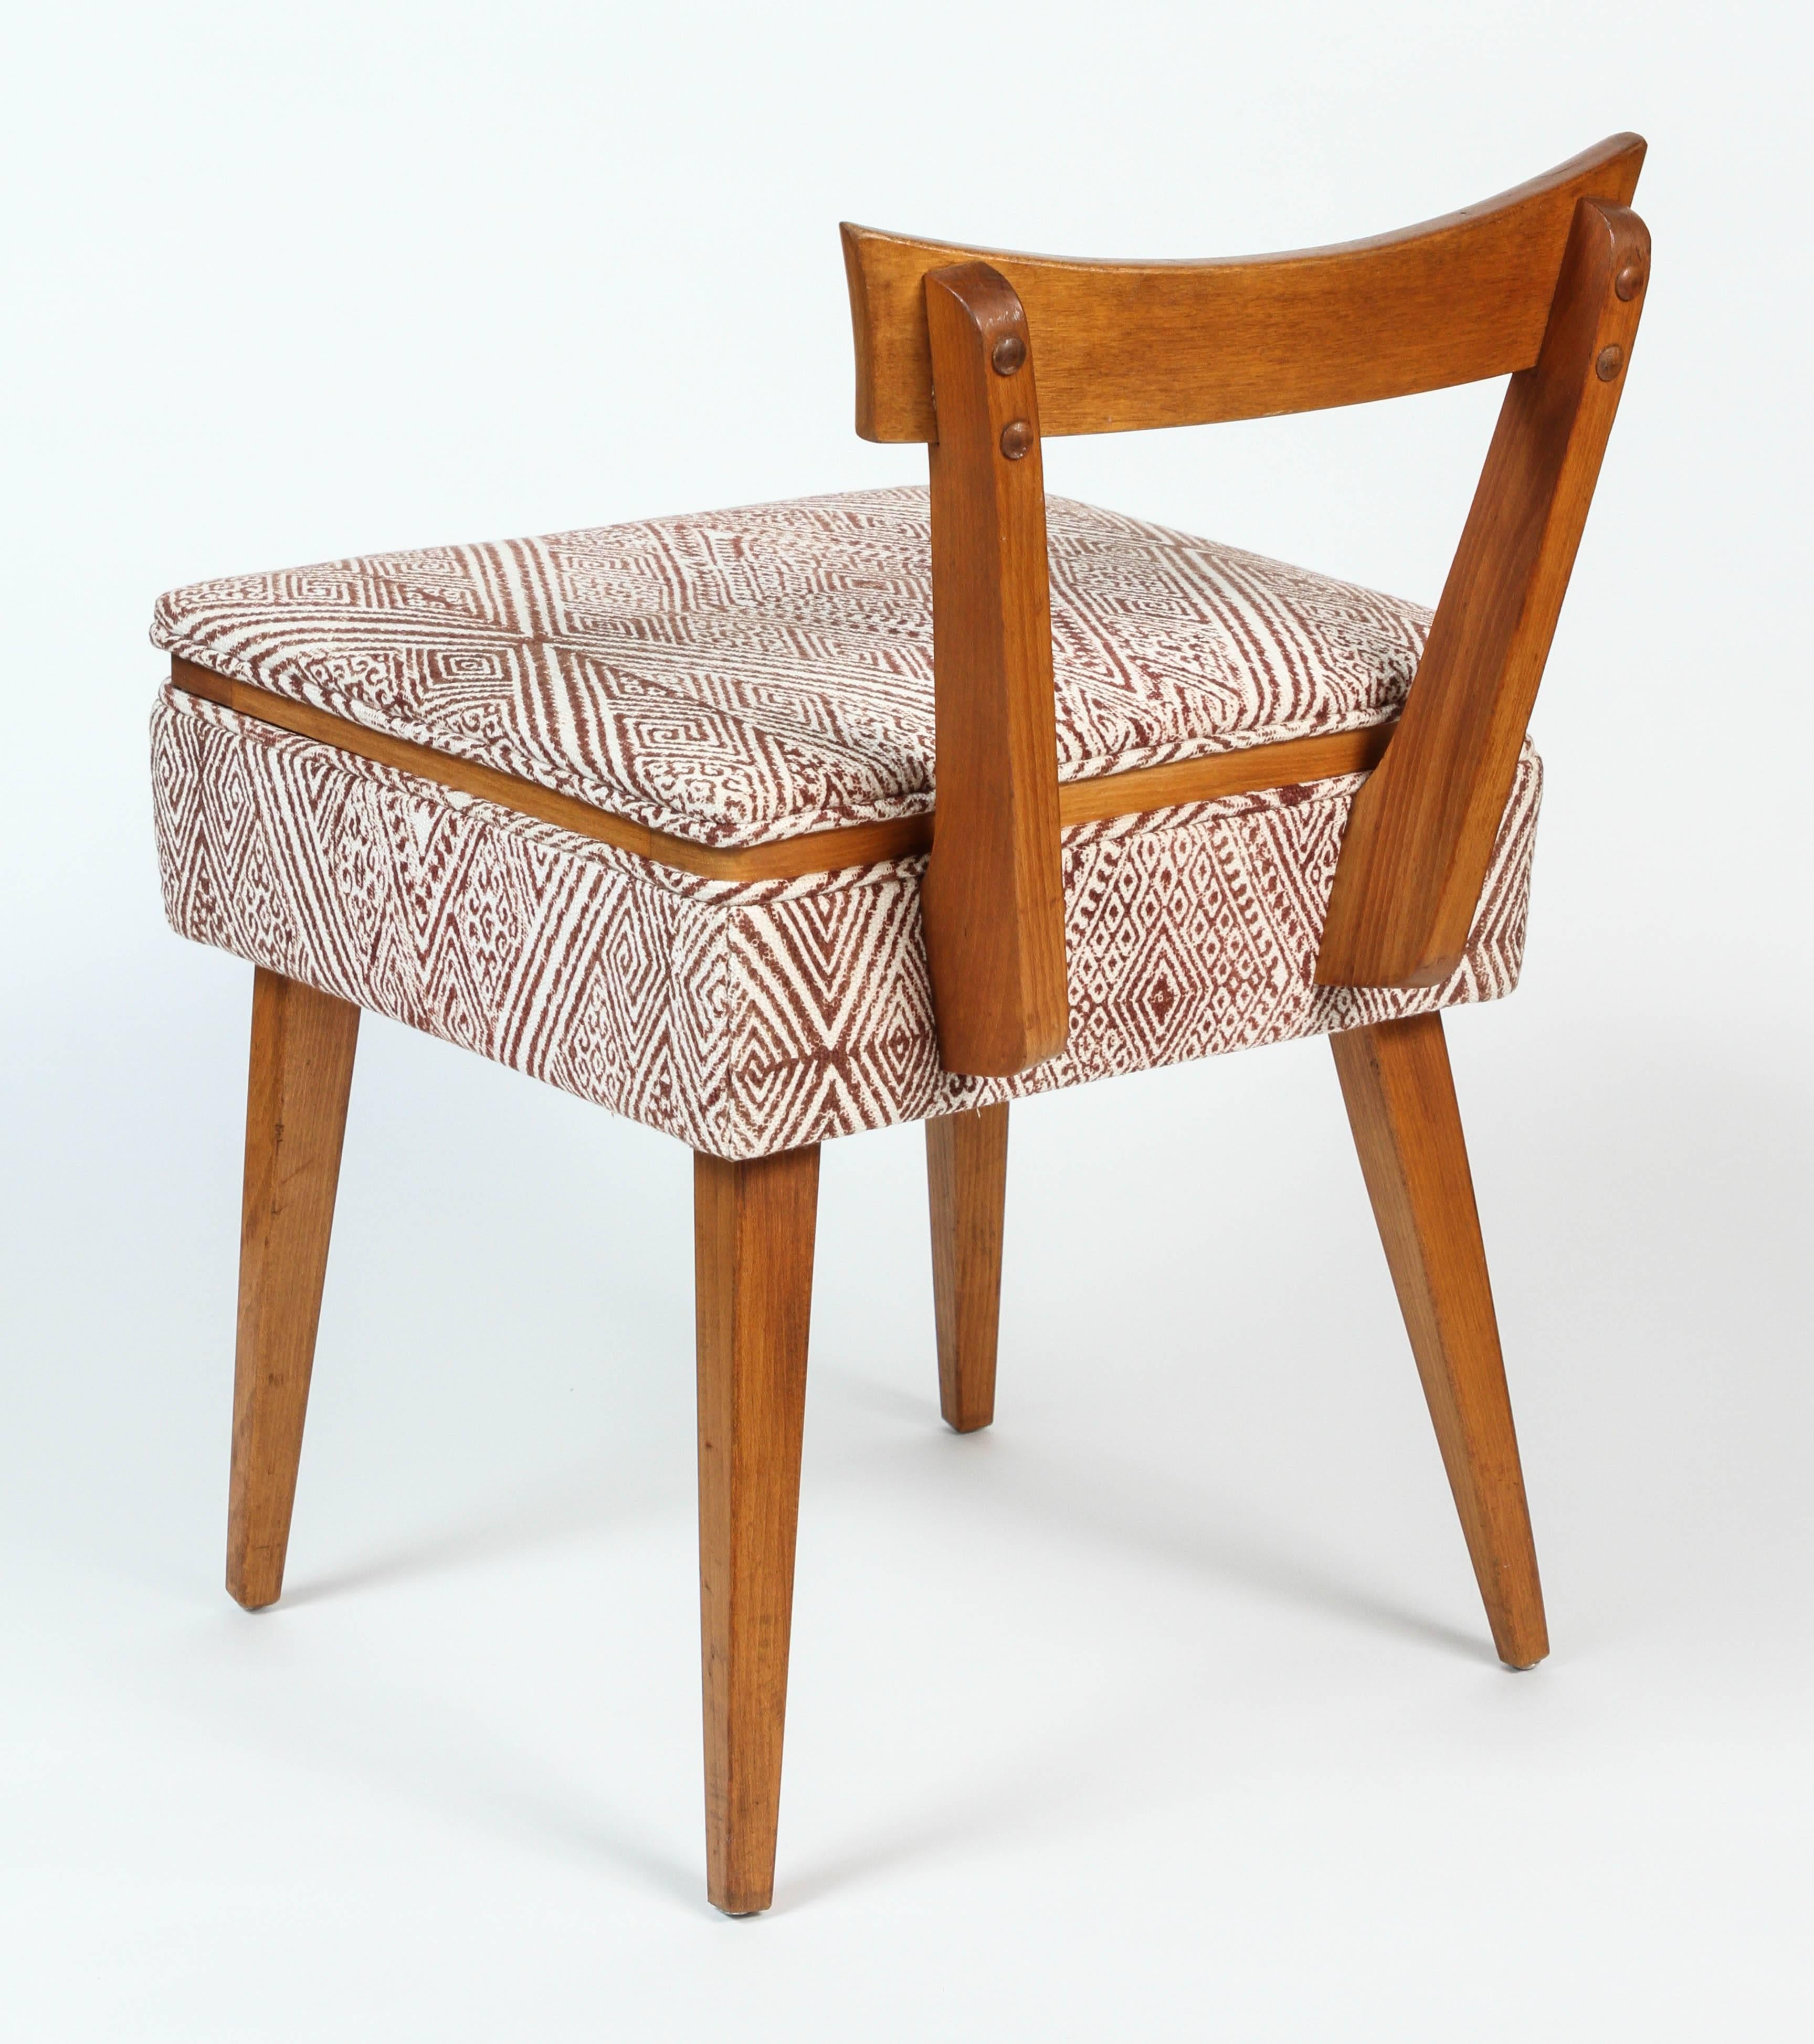 Mid-20th Century Midcentury Sewing Chair in John Robshaw Fabric